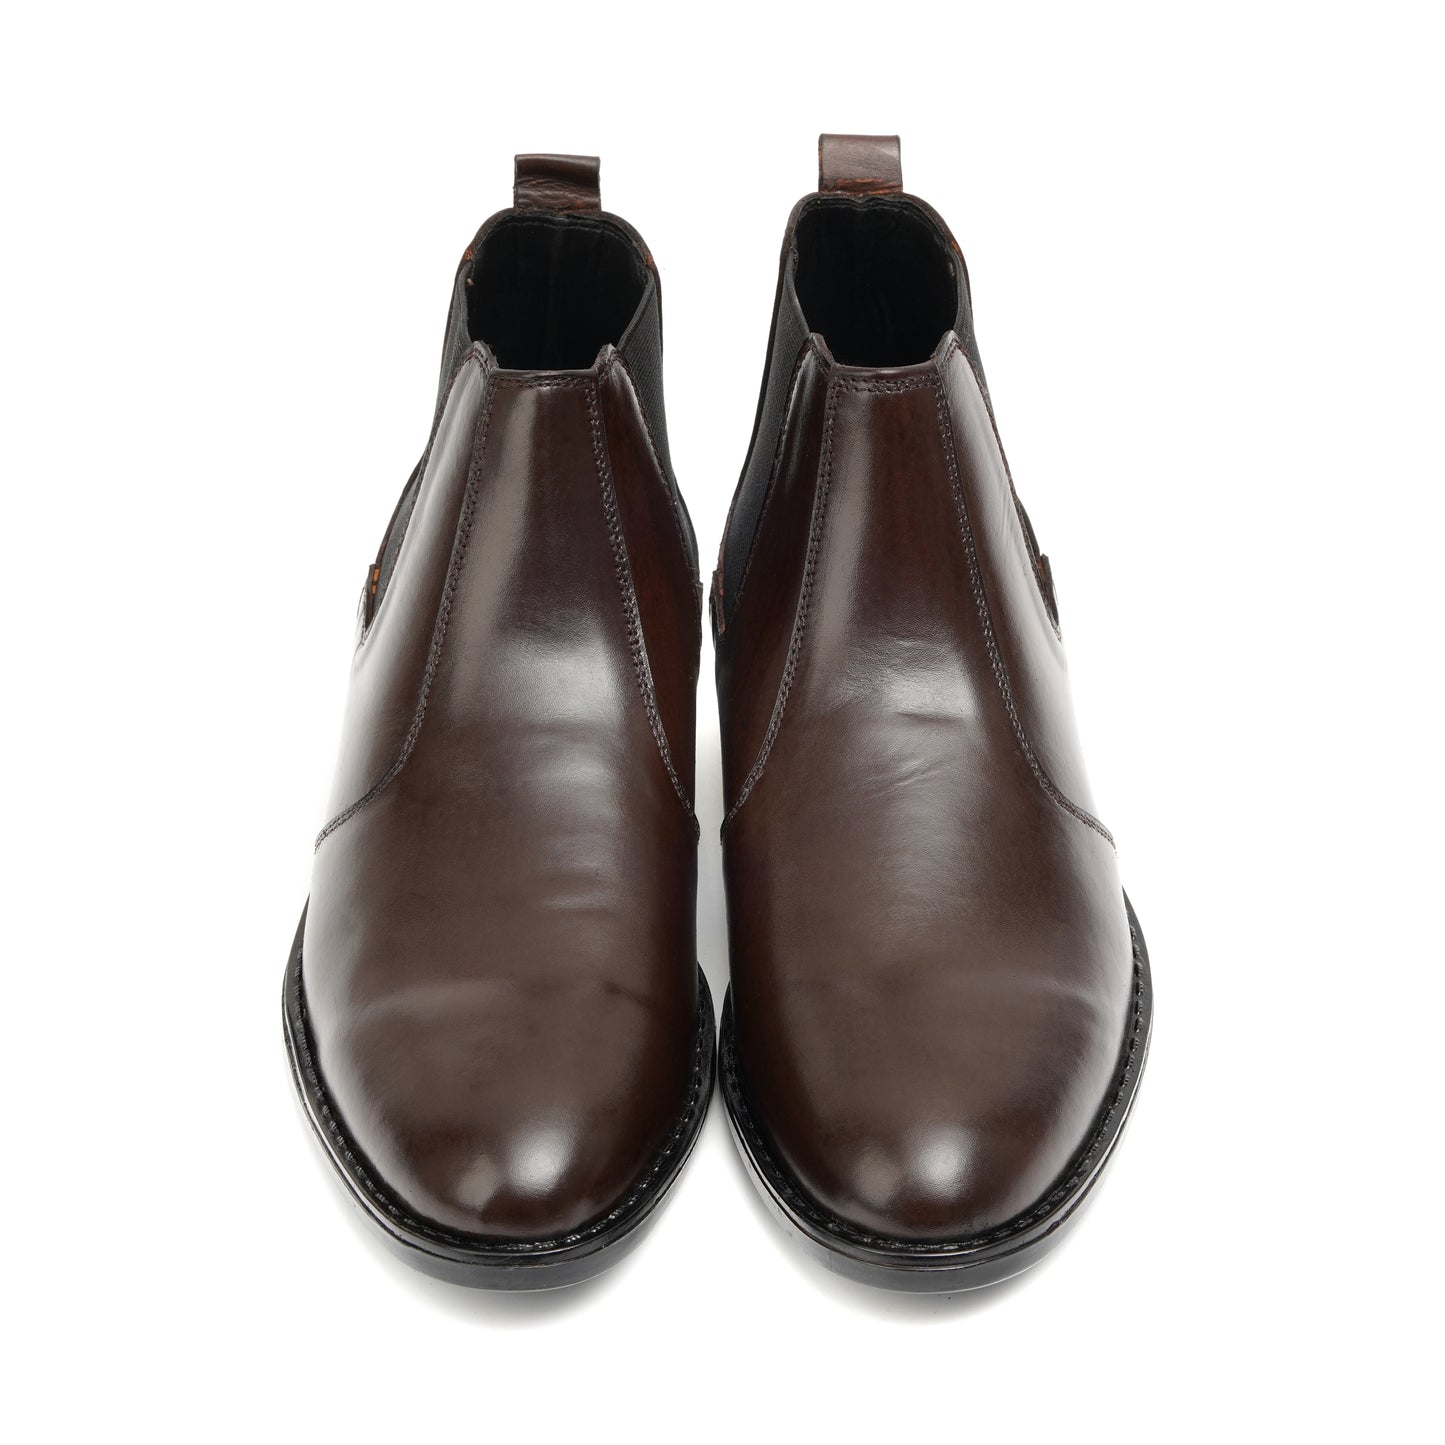 CS003-Brown Cow Leather Chelsea Boot